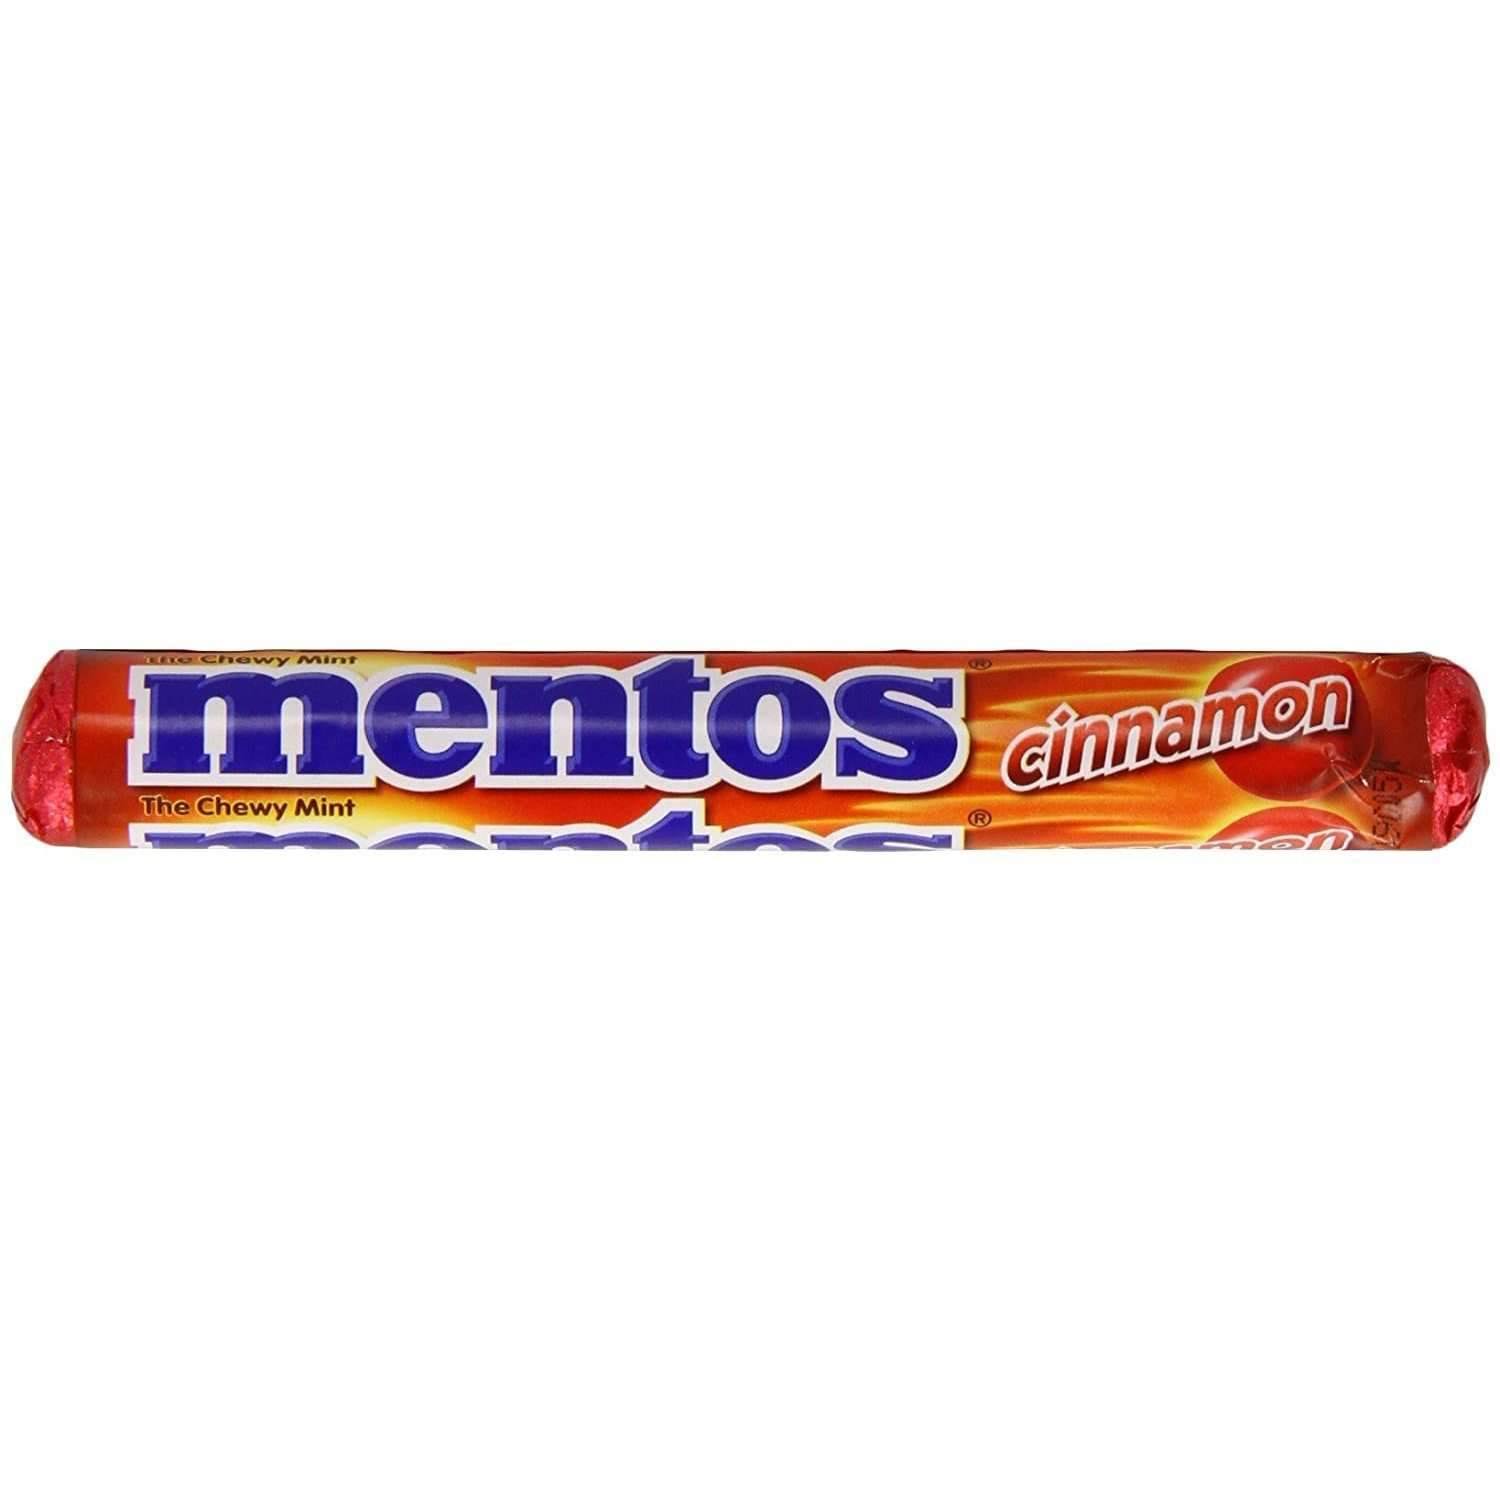 Mentos the Chewy Mint - Cinnamon, 37.5g